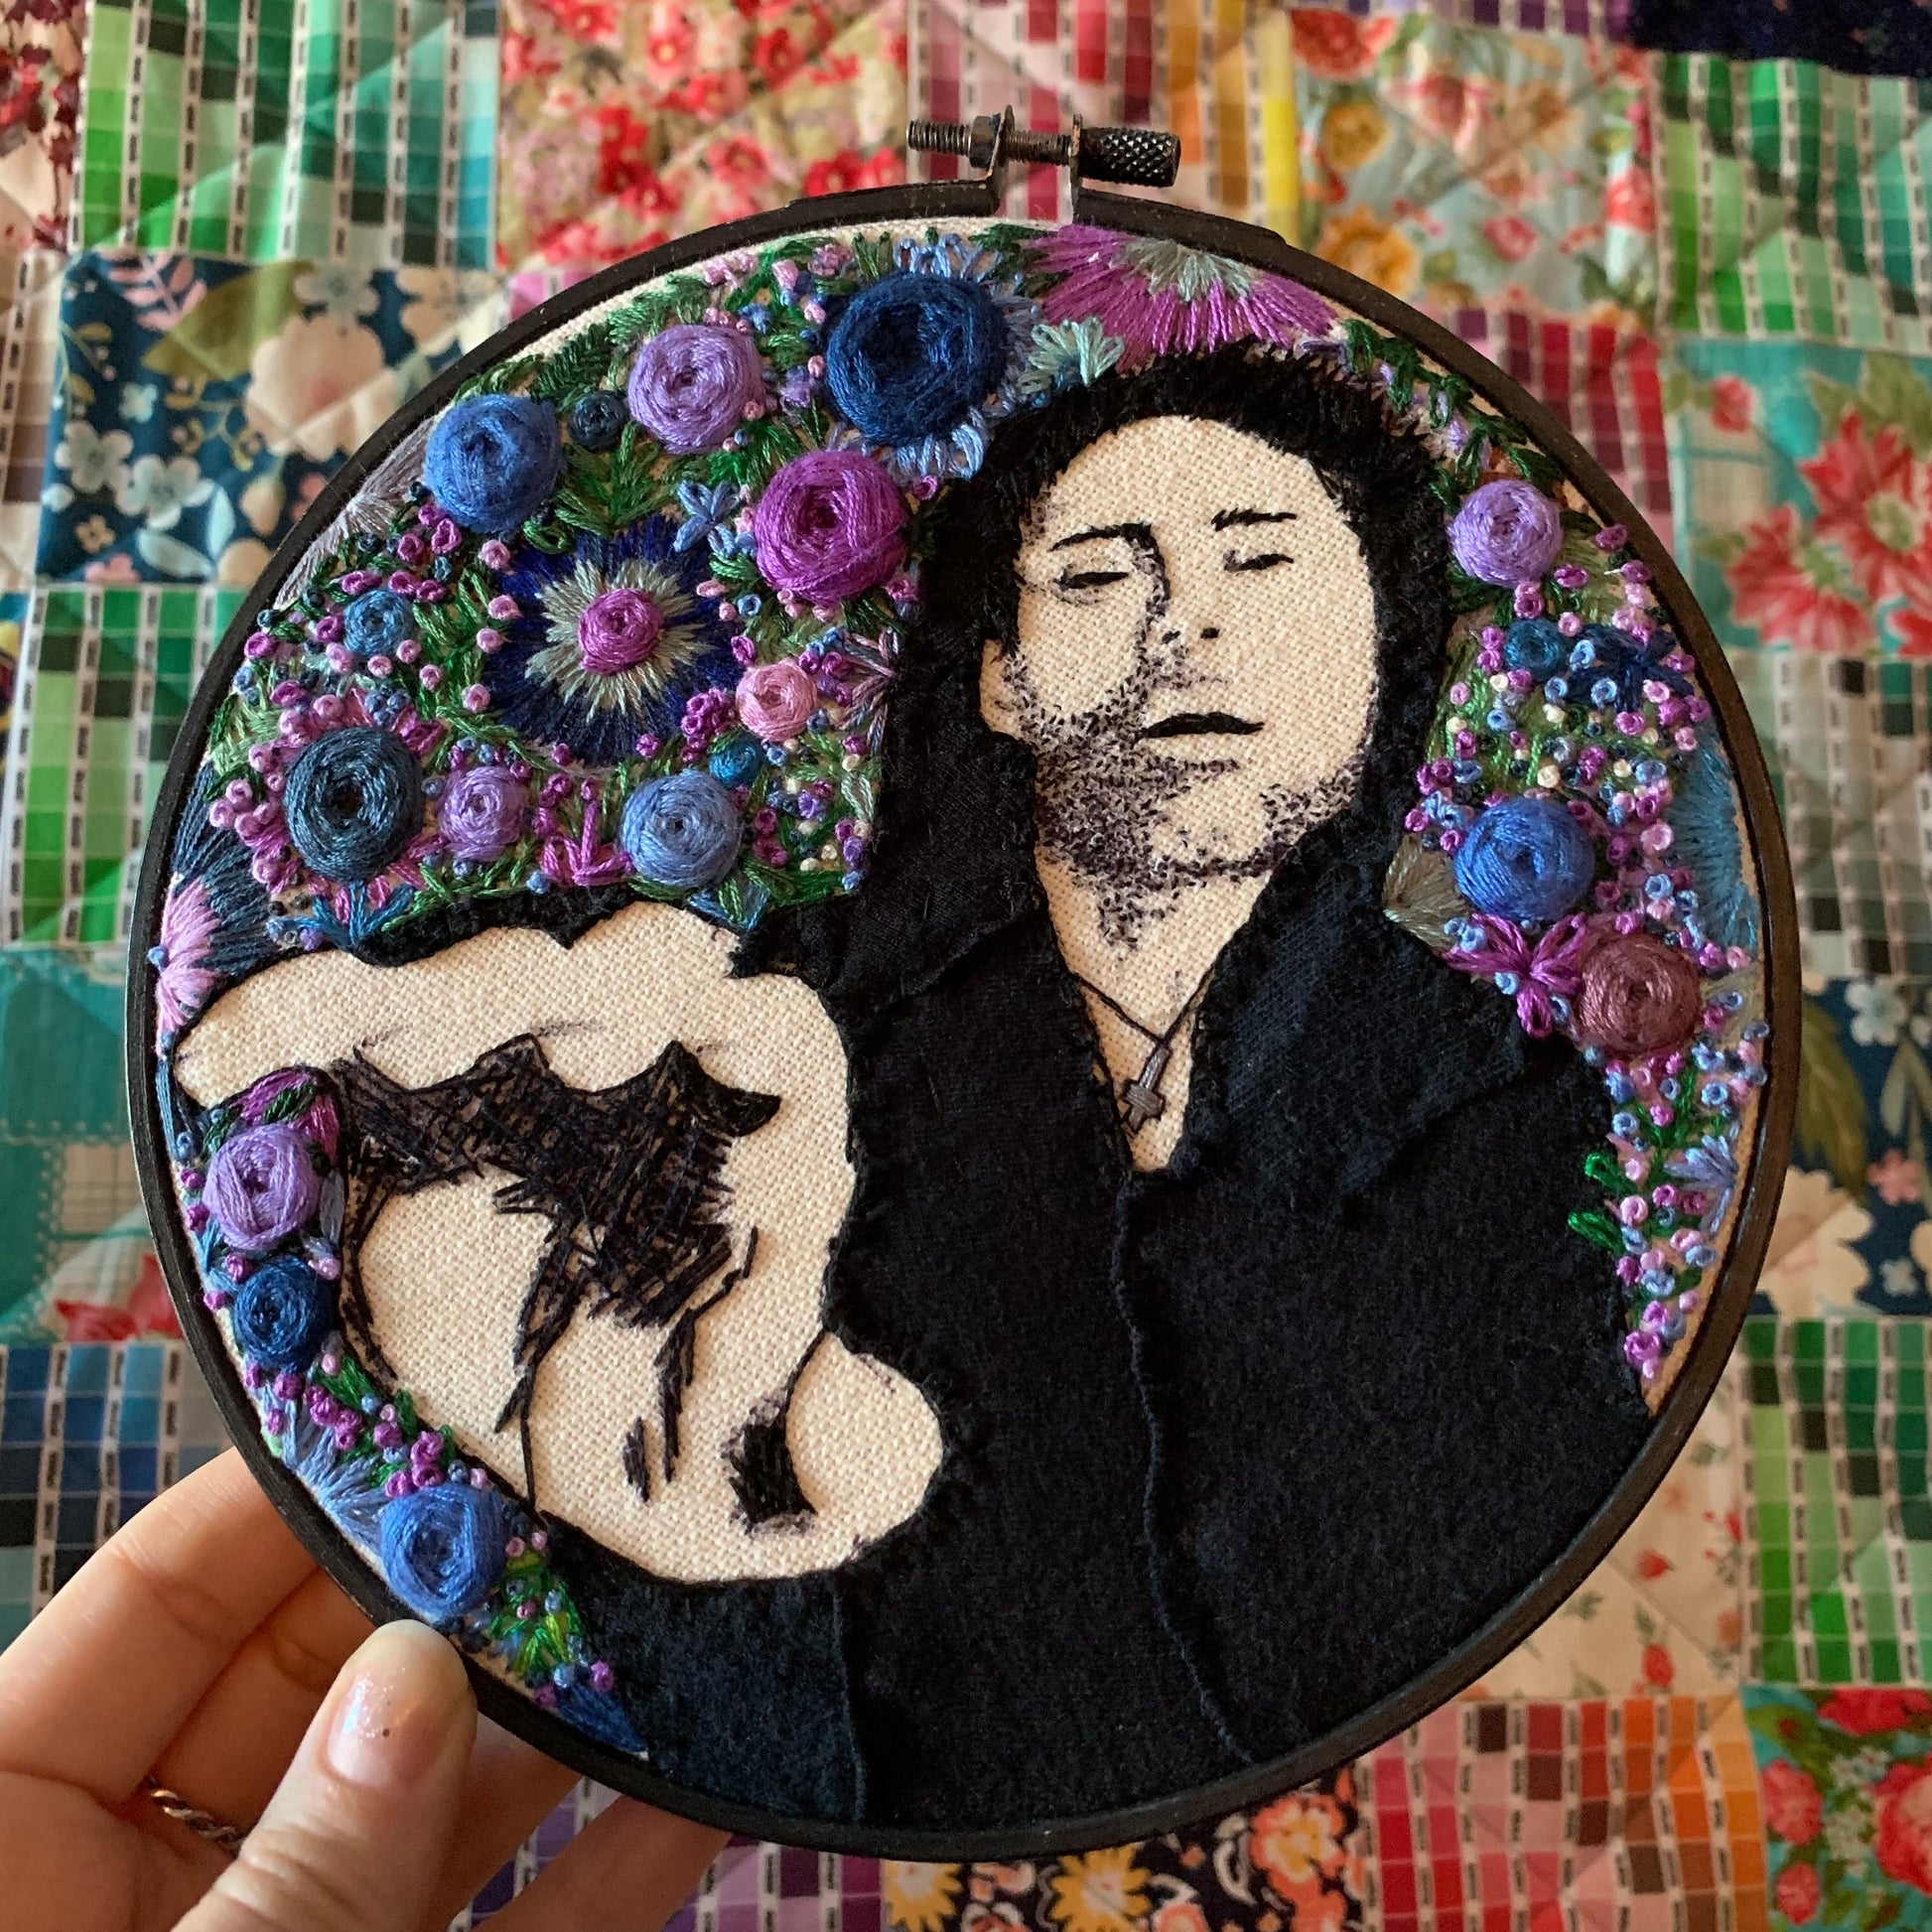 embroidery hoop featuring Davey Havok of AFI, hoop is held up against a colorful background